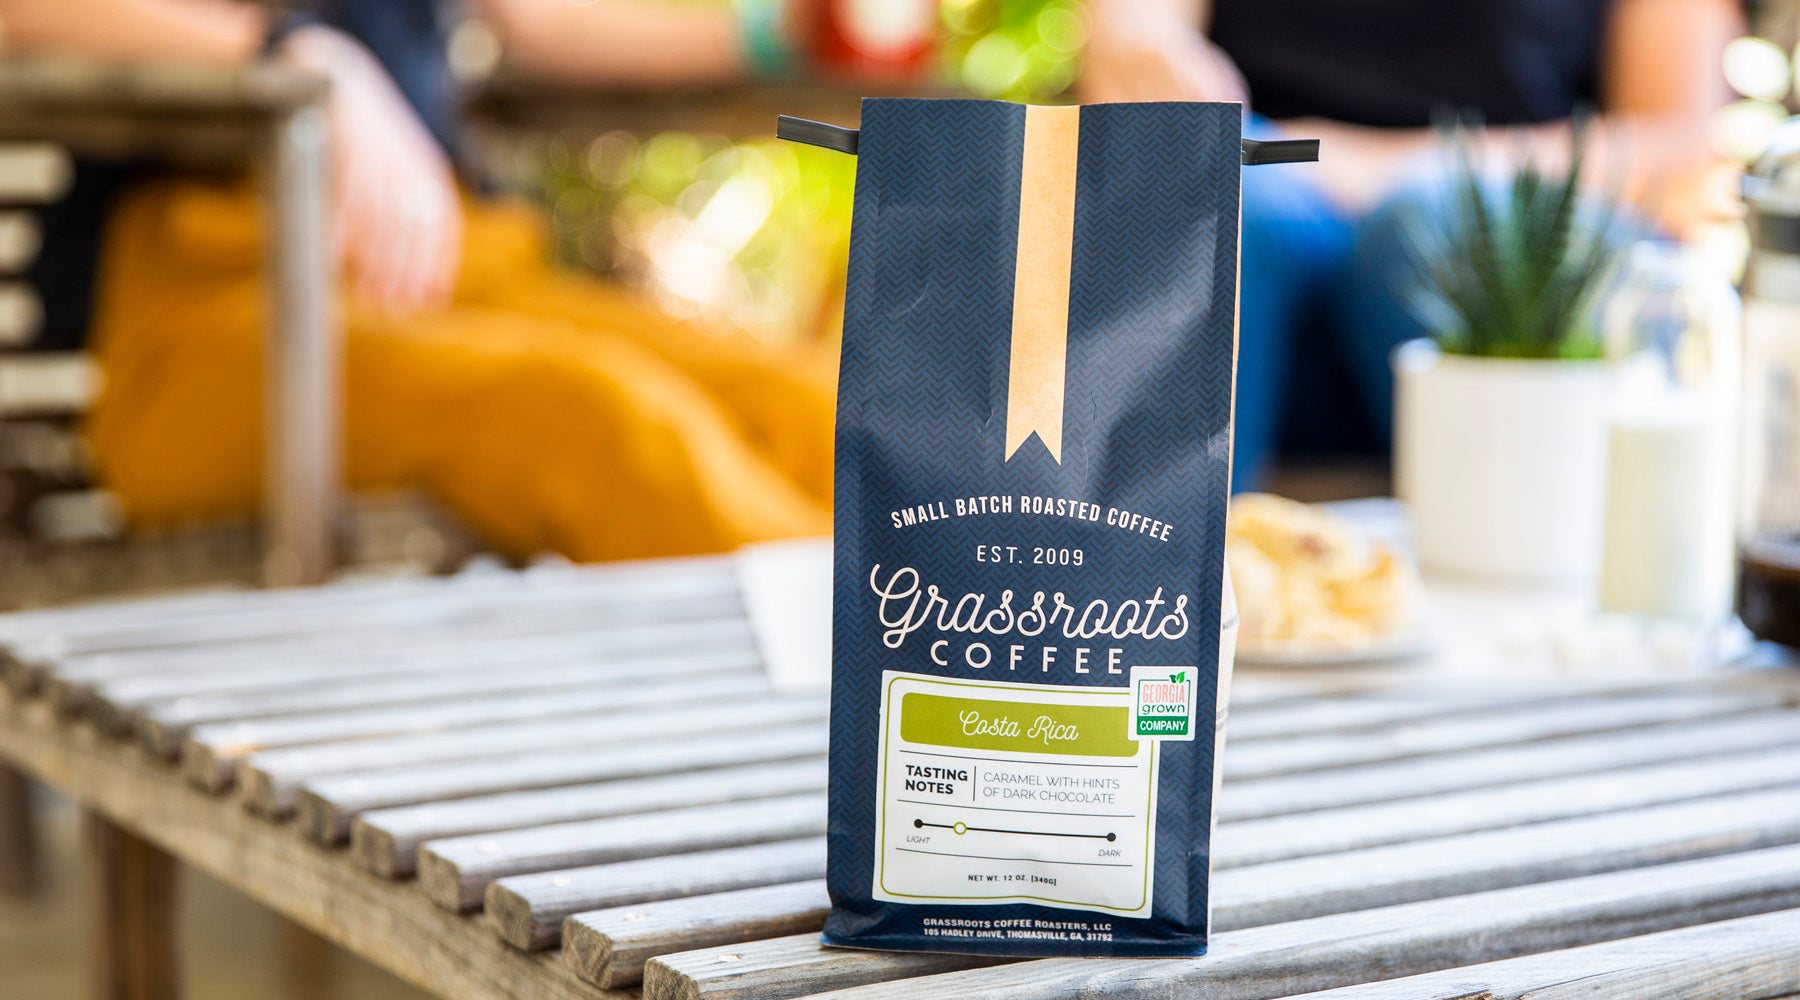 Find a retailer carrying your favorite Grassroots Coffee near you!